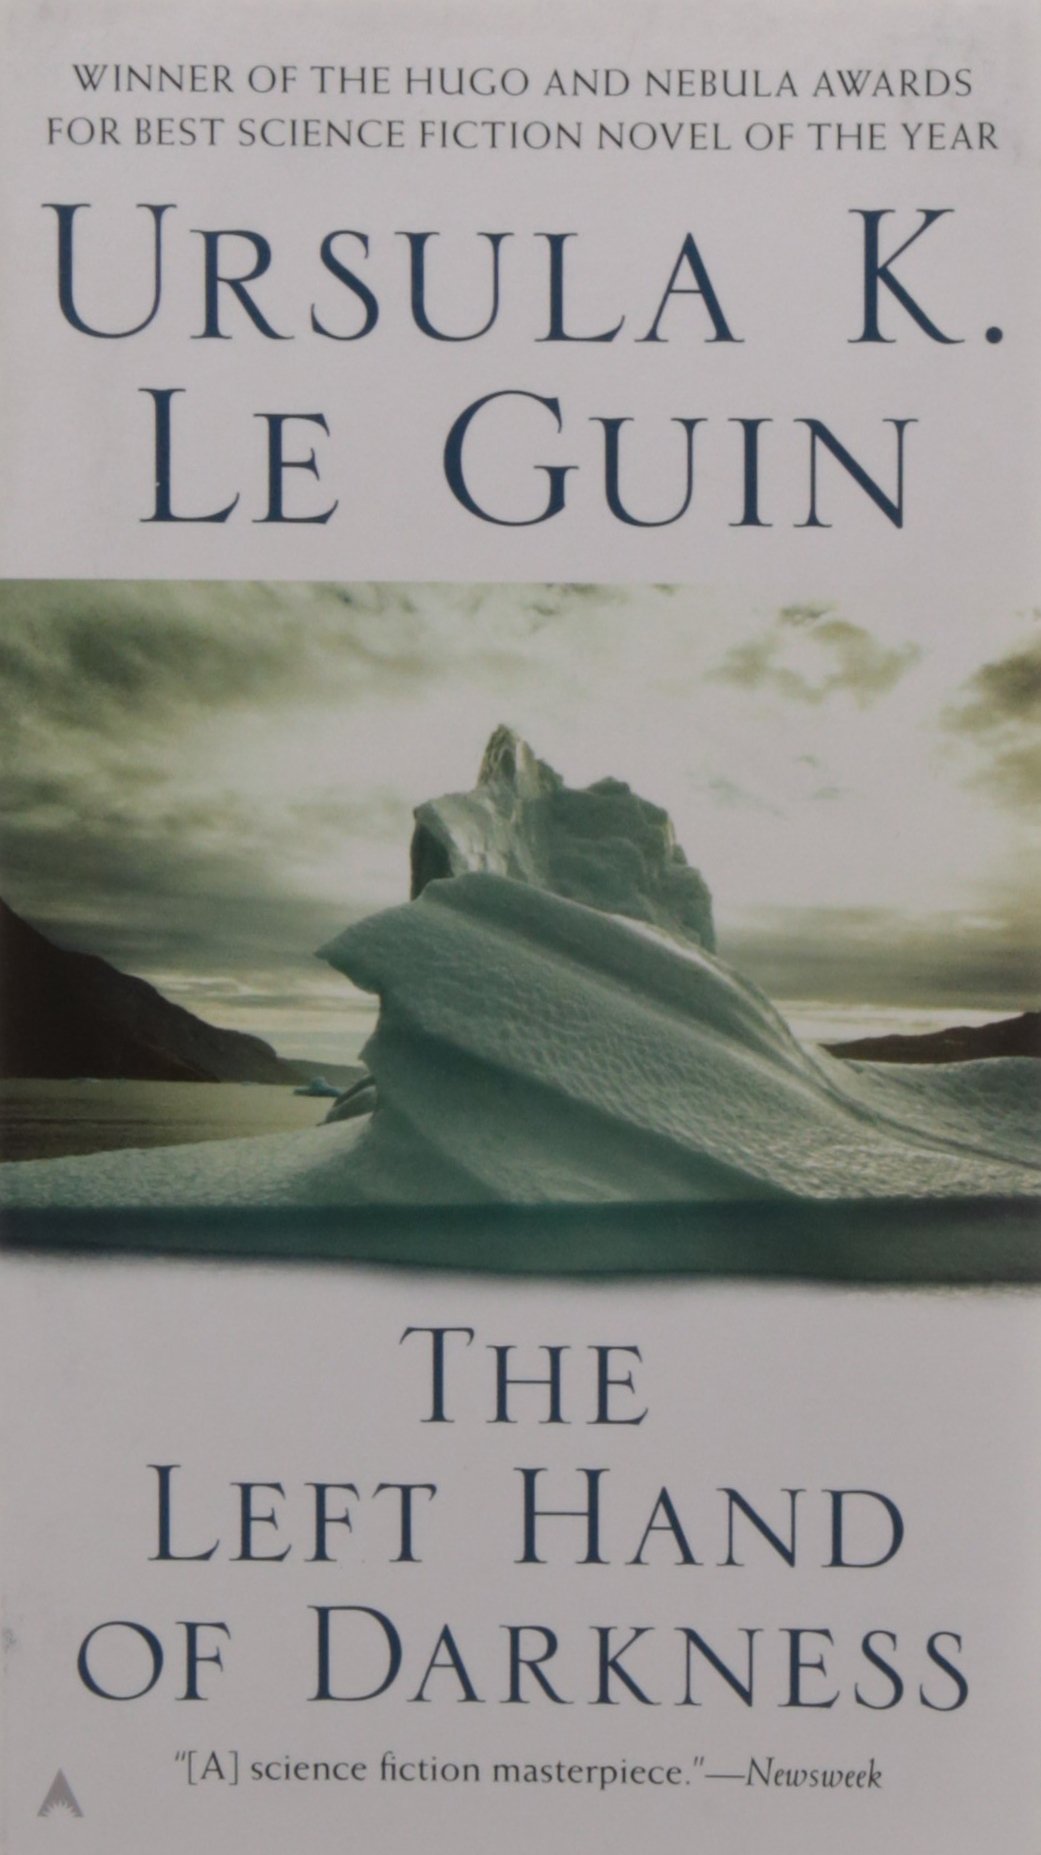 The Left Hand of Darkness, by Ursula K. Le Guin